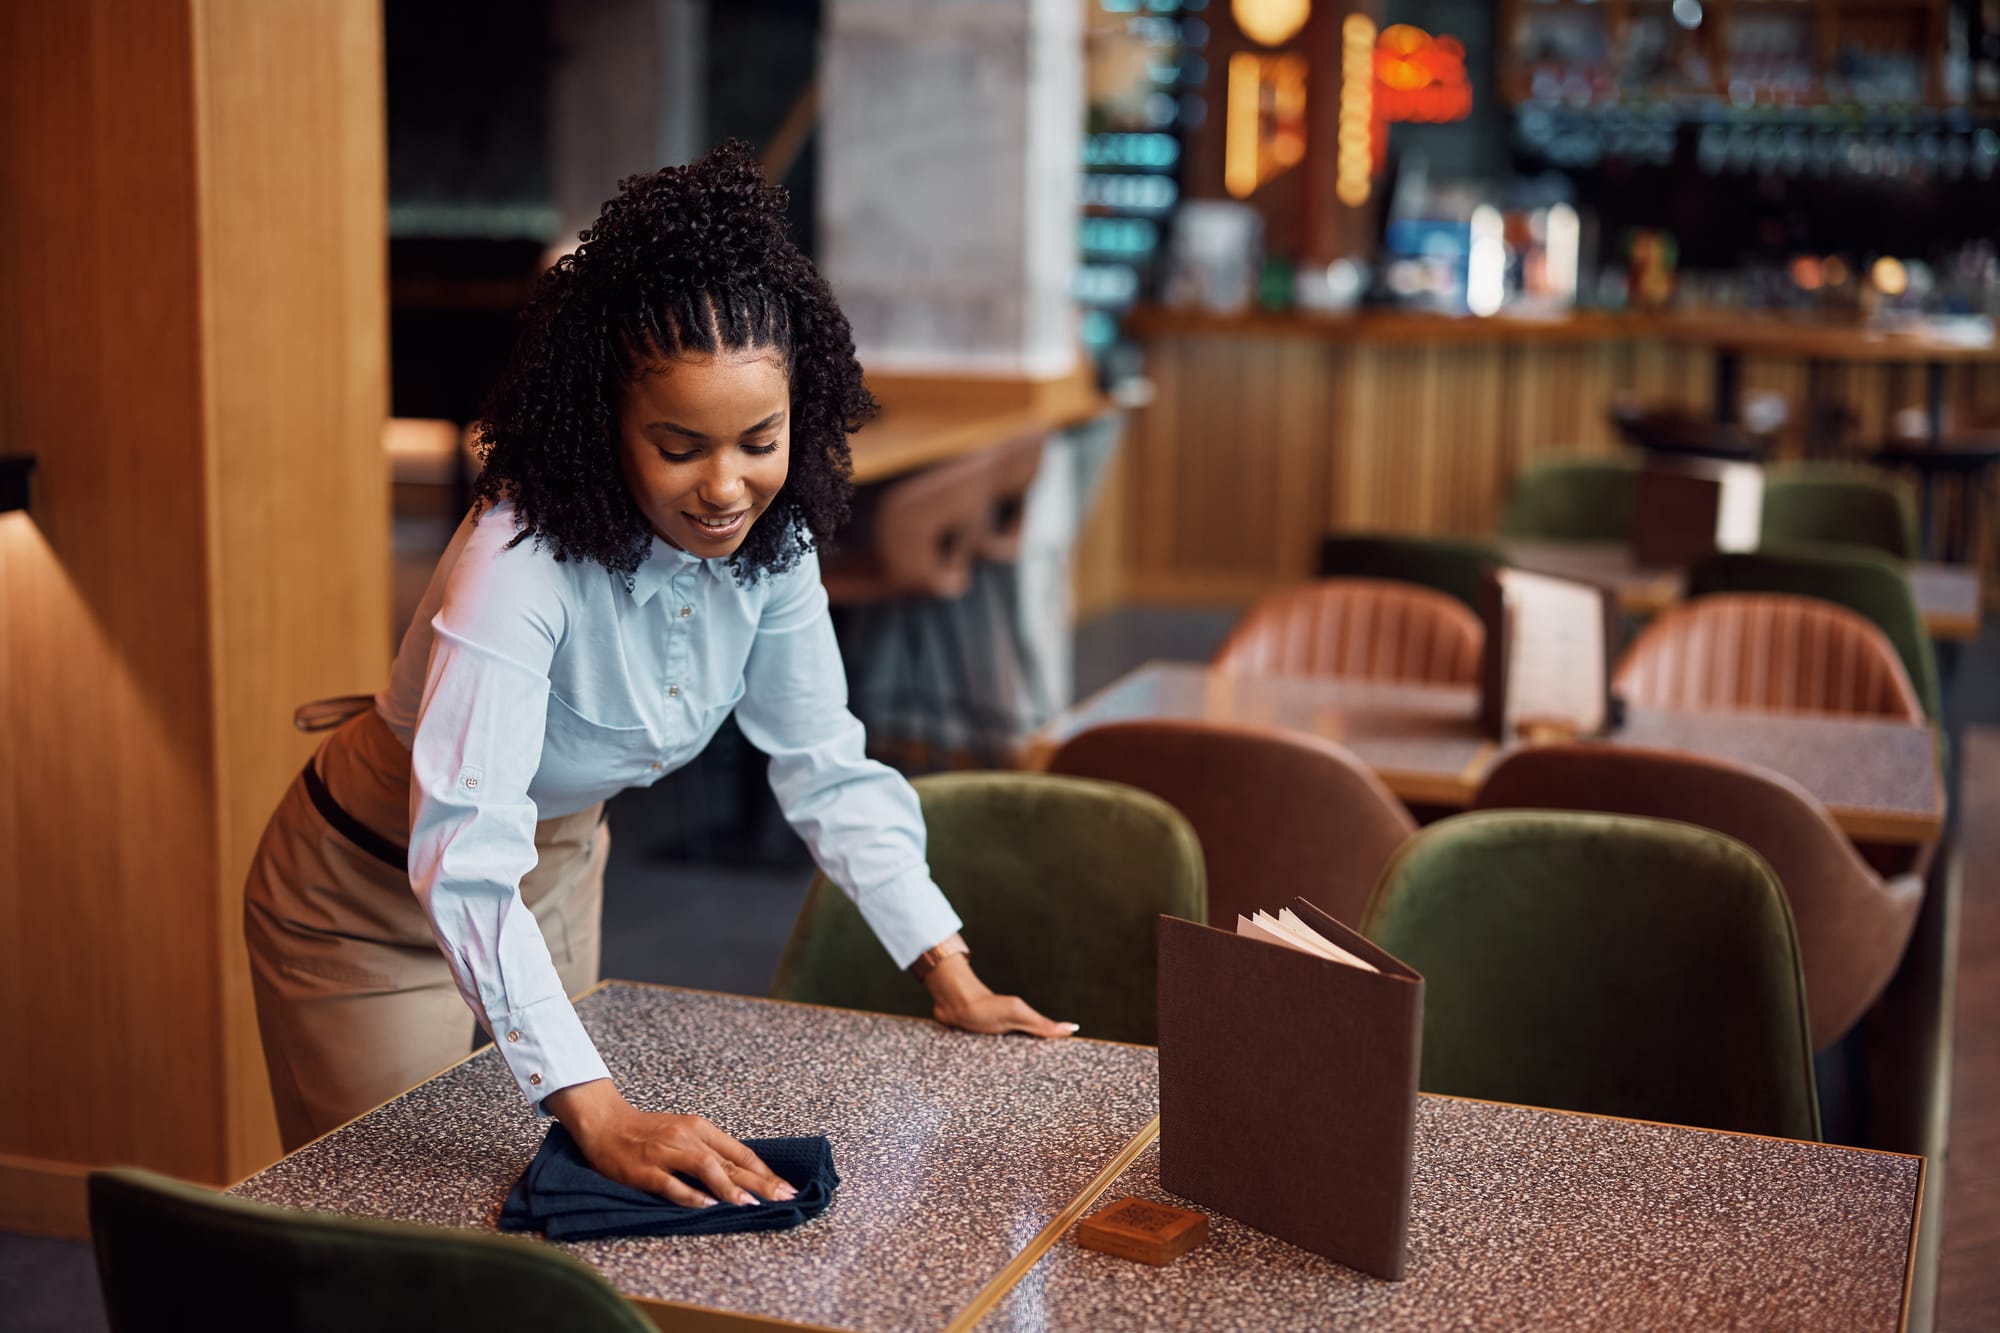 Woman wipes a table in an empty restaurant.